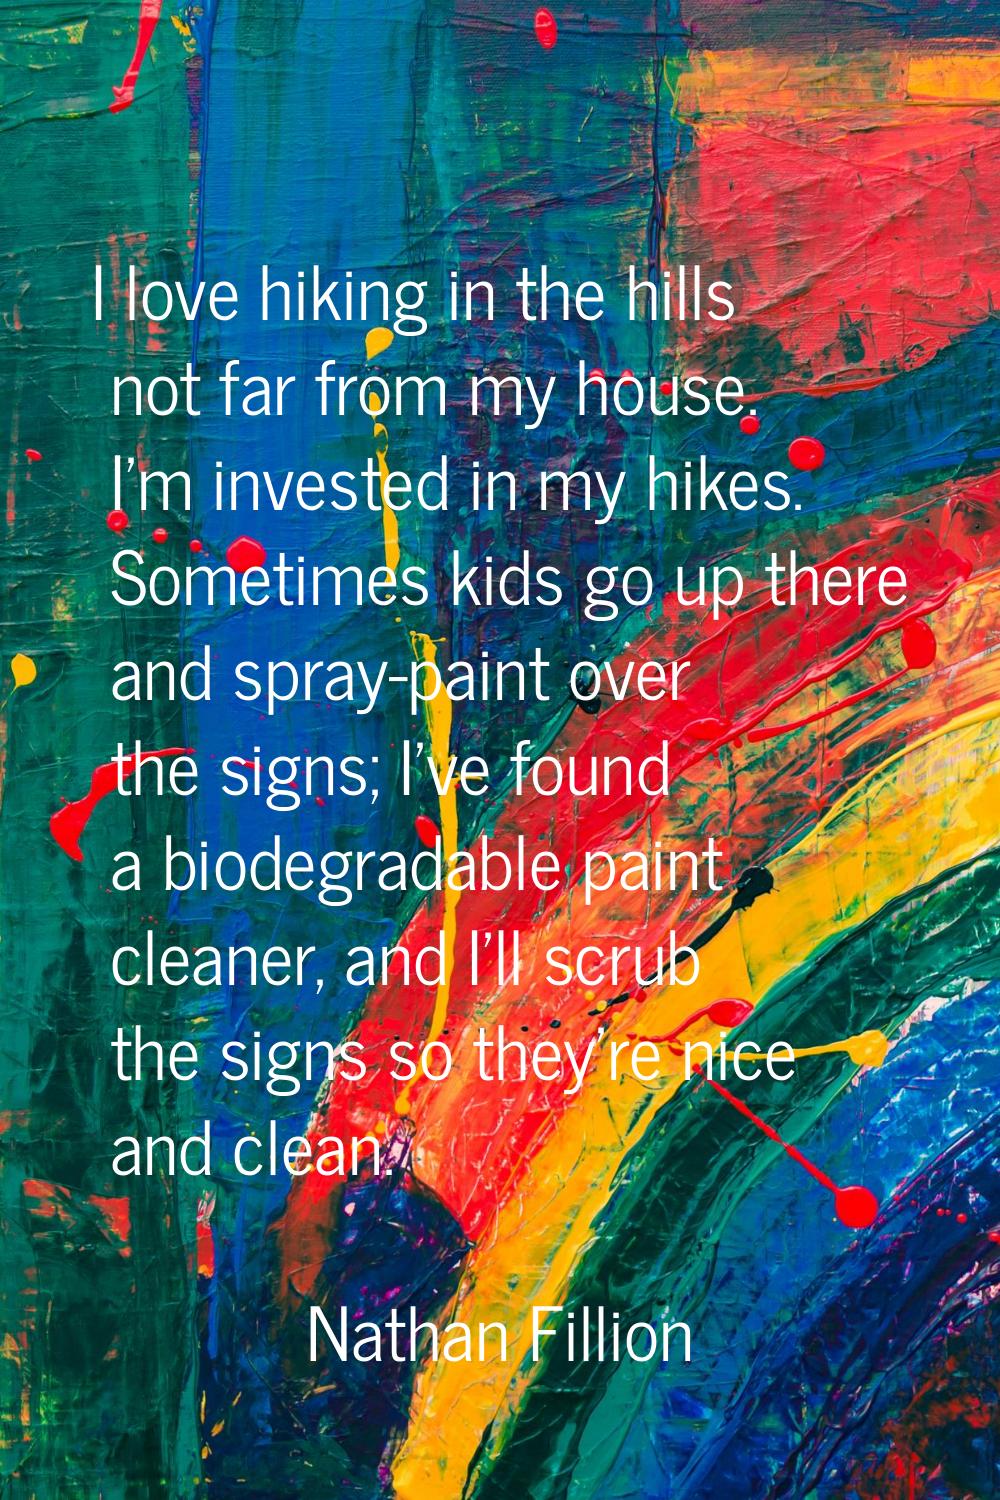 I love hiking in the hills not far from my house. I'm invested in my hikes. Sometimes kids go up th